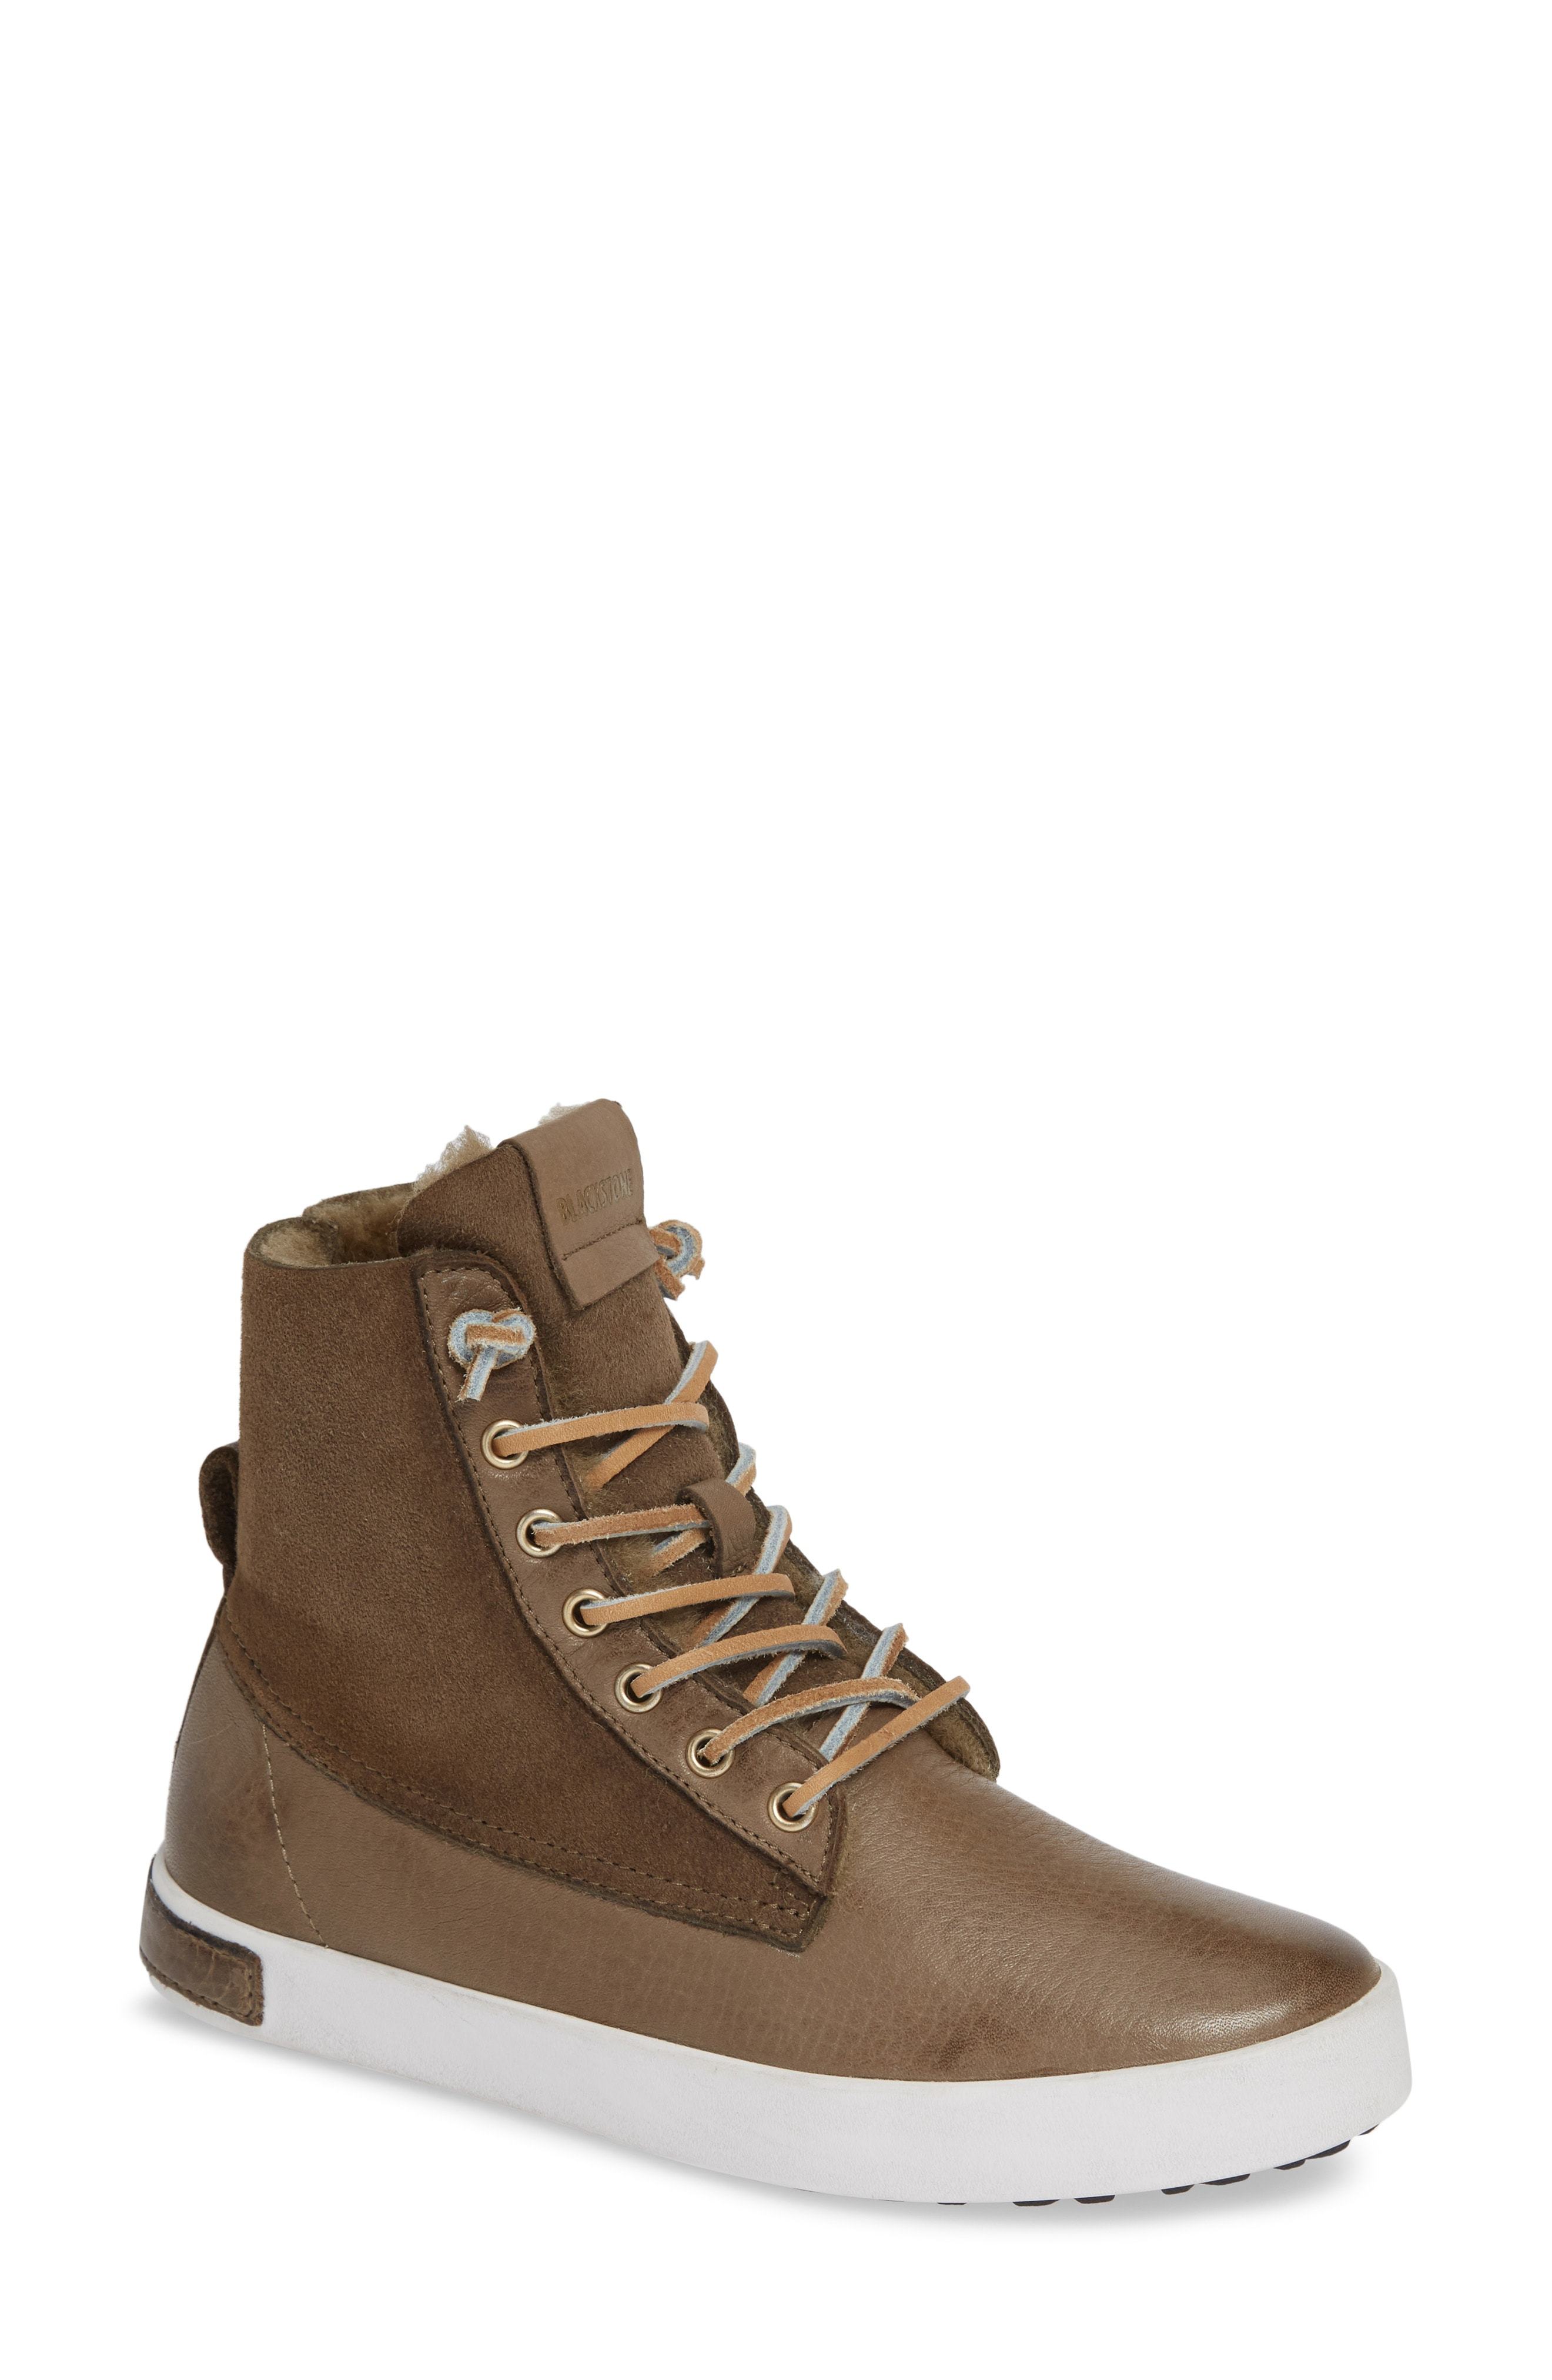 shearling lined sneaker boot